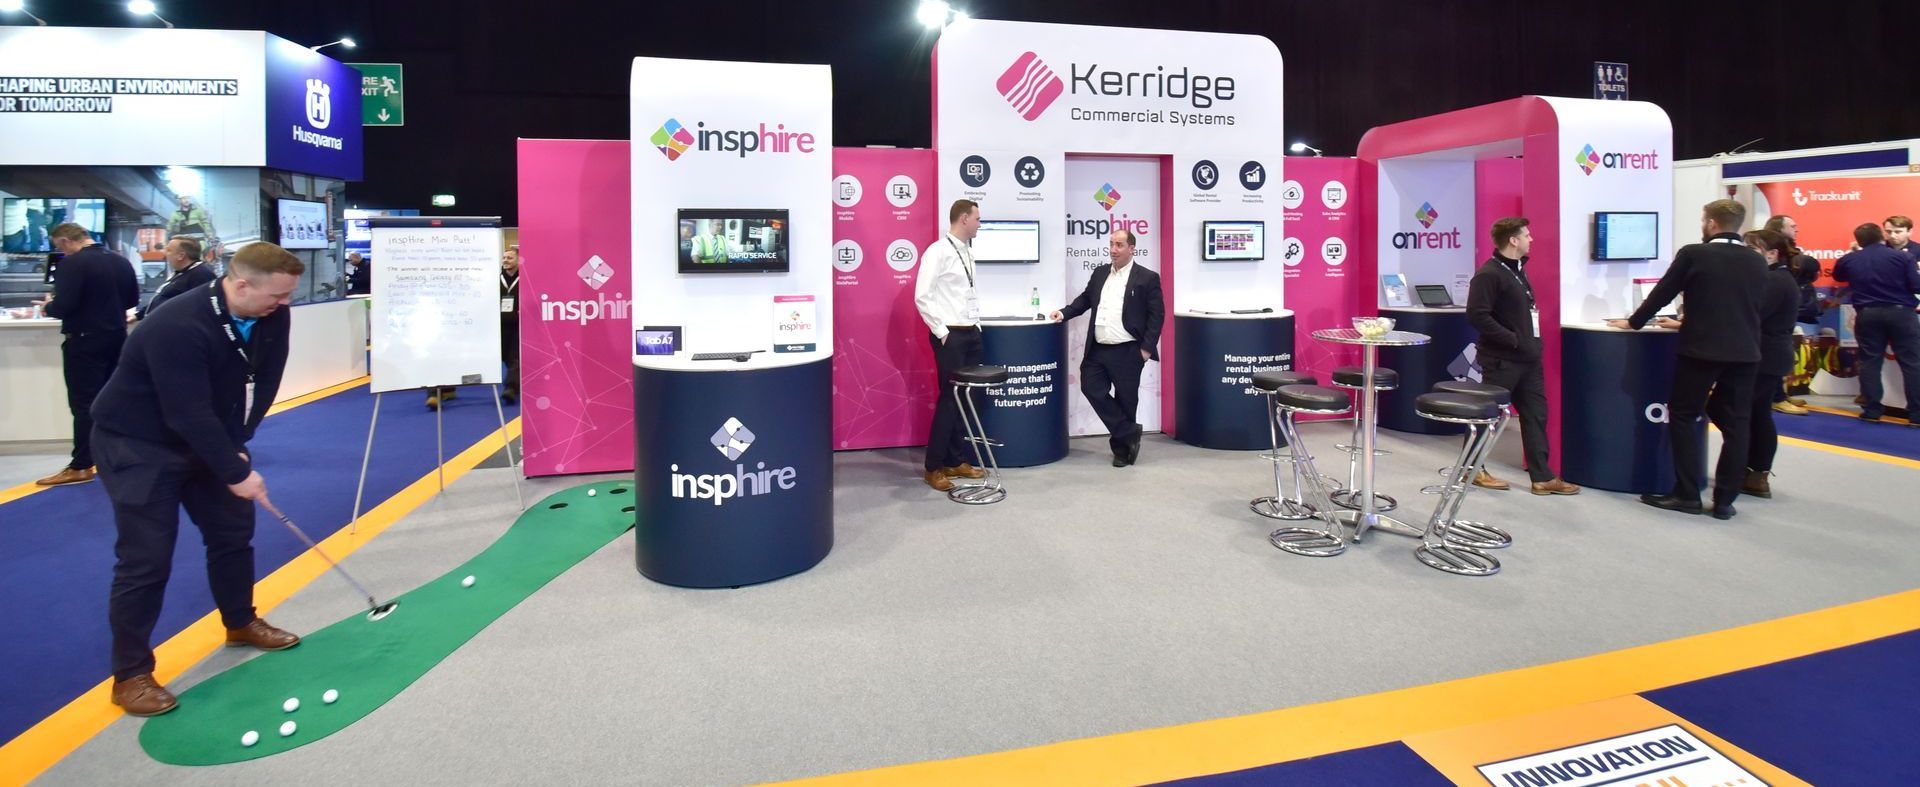 Exhibition Stand by Tecna UK for InspHire